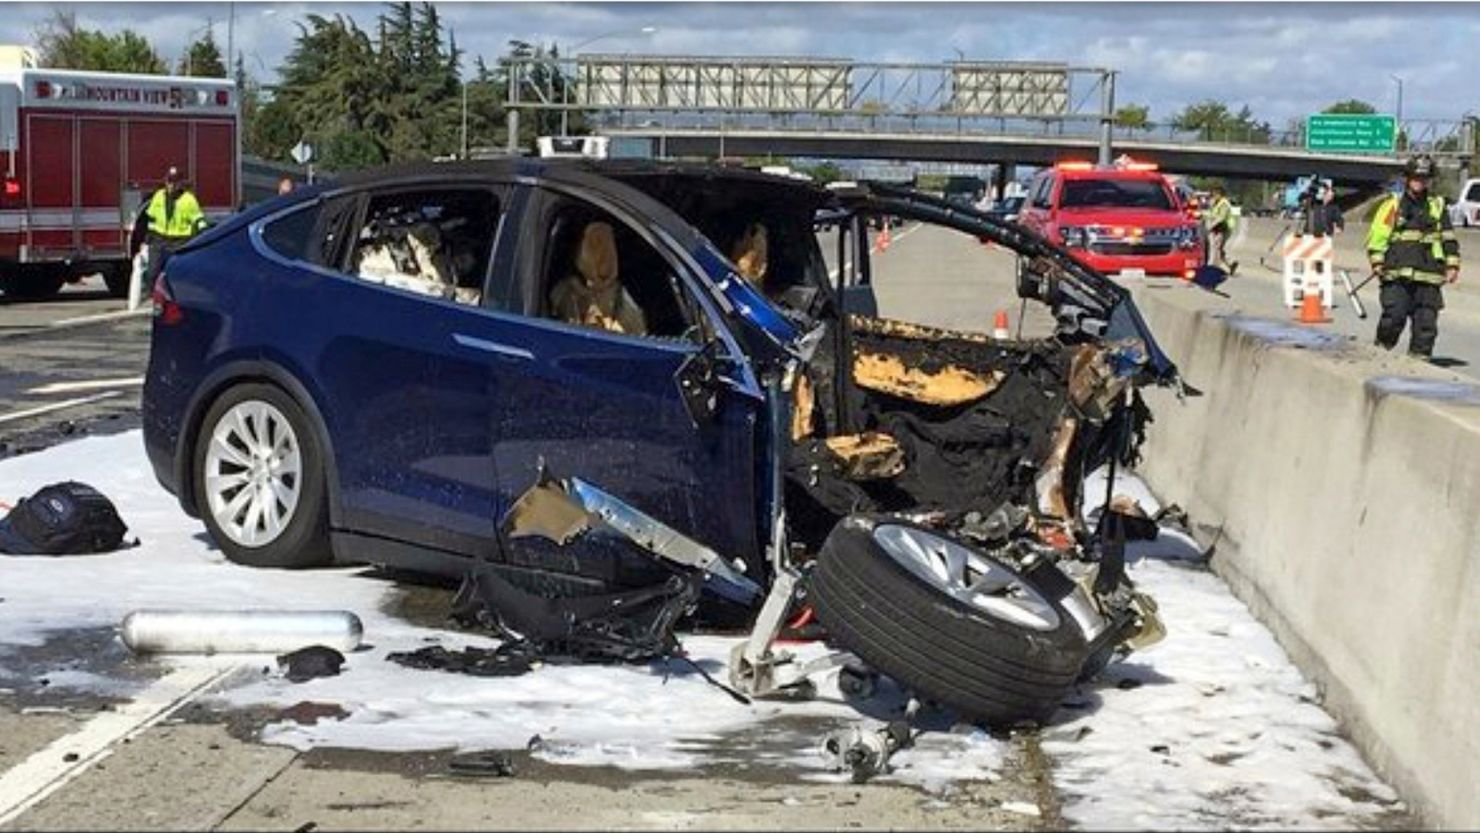 Walter Huang died when his Tesla Model X crashed into a concrete barrier.